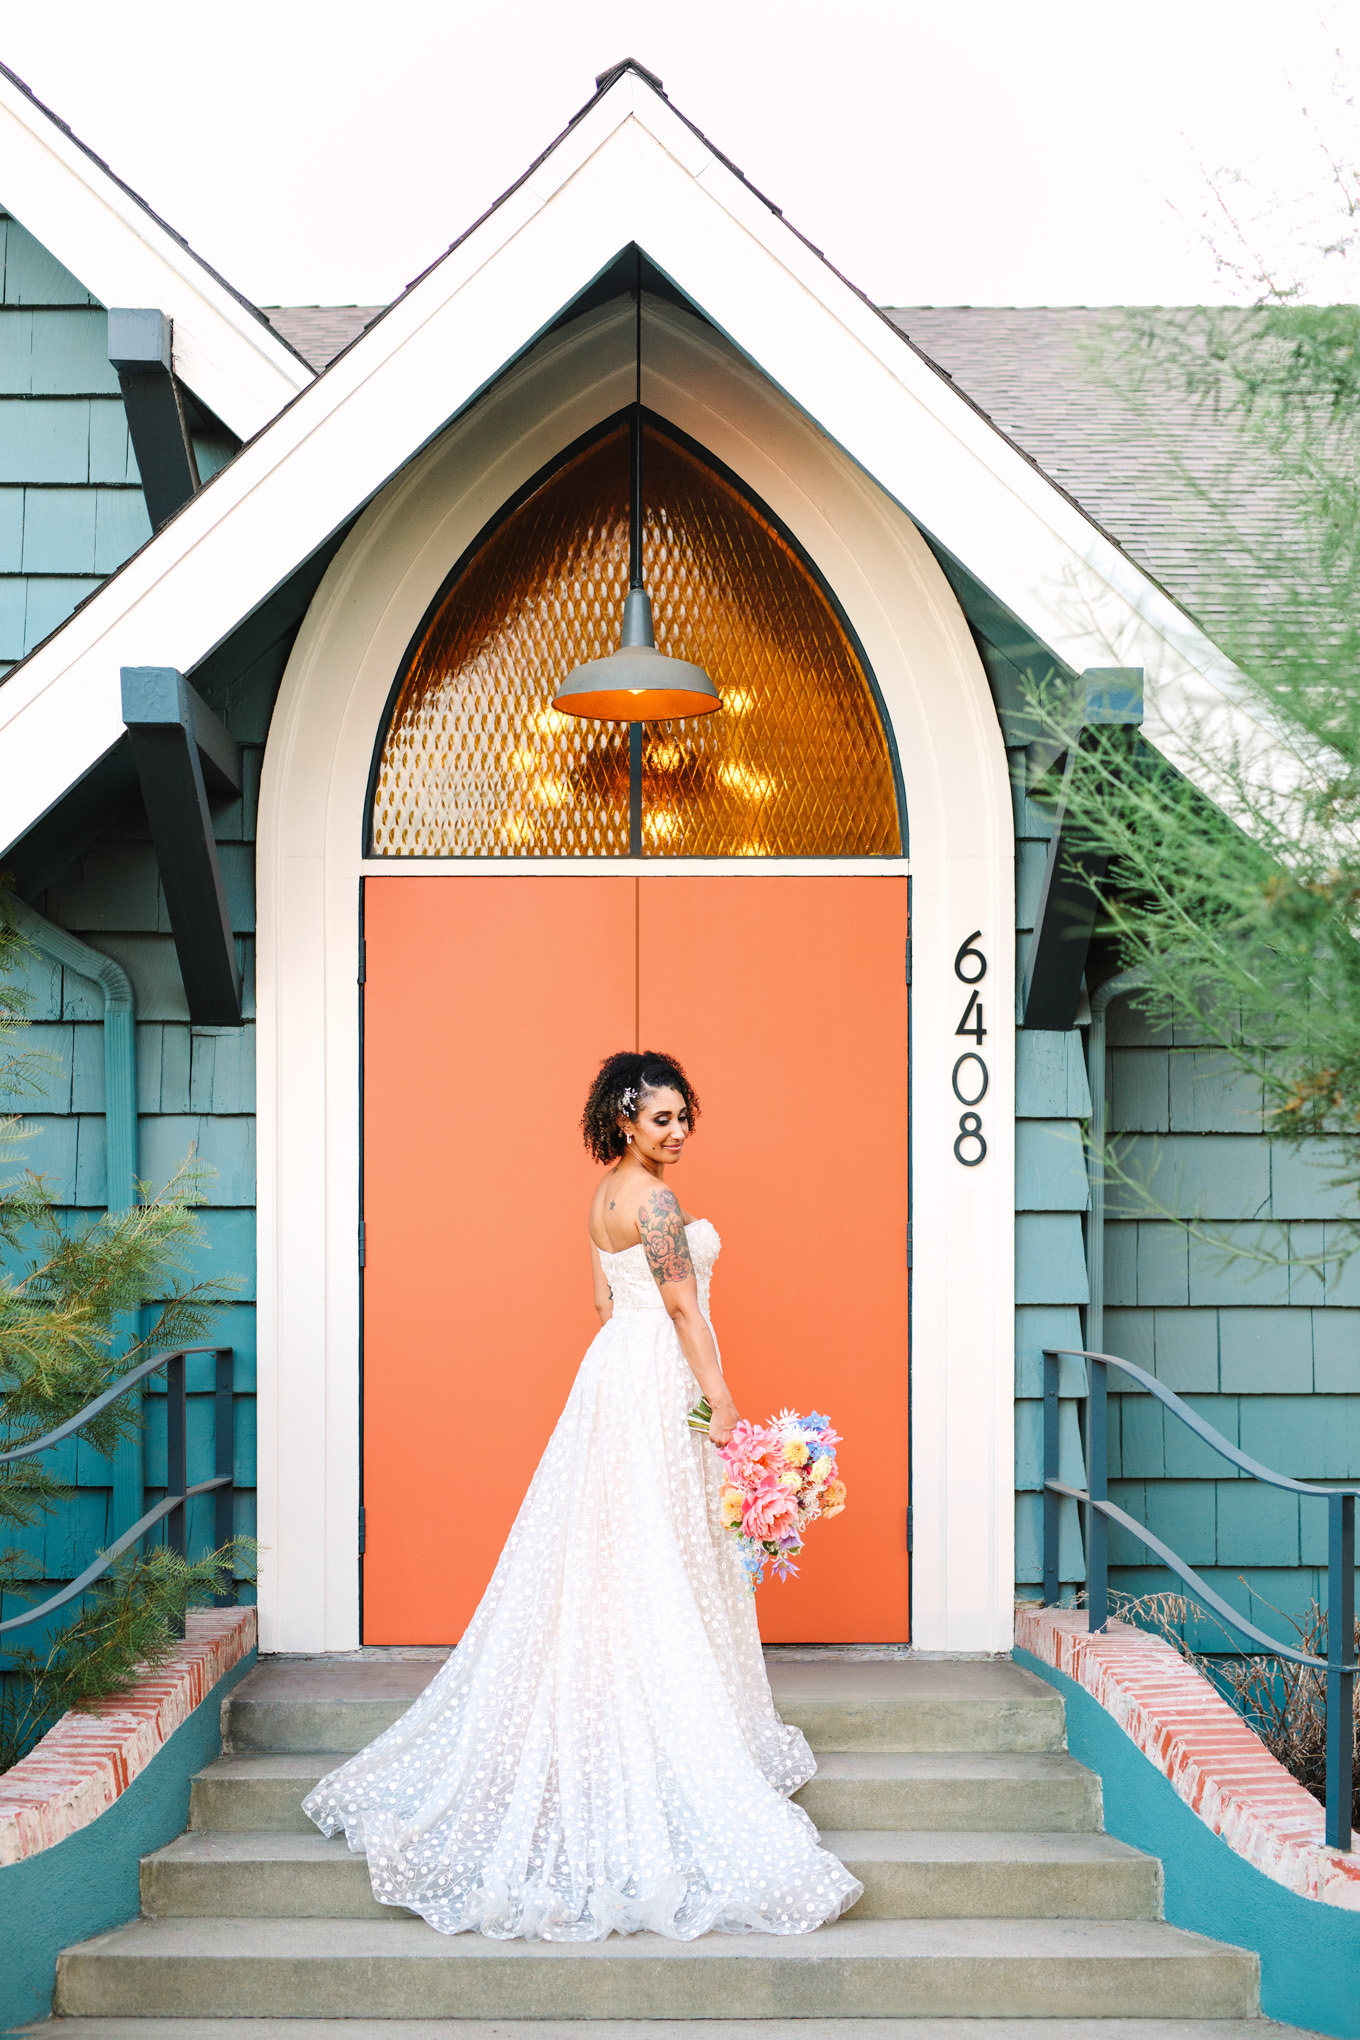 Bride in front of Ruby Street's orange door | Colorful pop-up micro wedding at The Ruby Street Los Angeles featured on Green Wedding Shoes | Colorful and elevated photography for fun-loving couples in Southern California | #colorfulwedding #popupwedding #weddingphotography #microwedding Source: Mary Costa Photography | Los Angeles